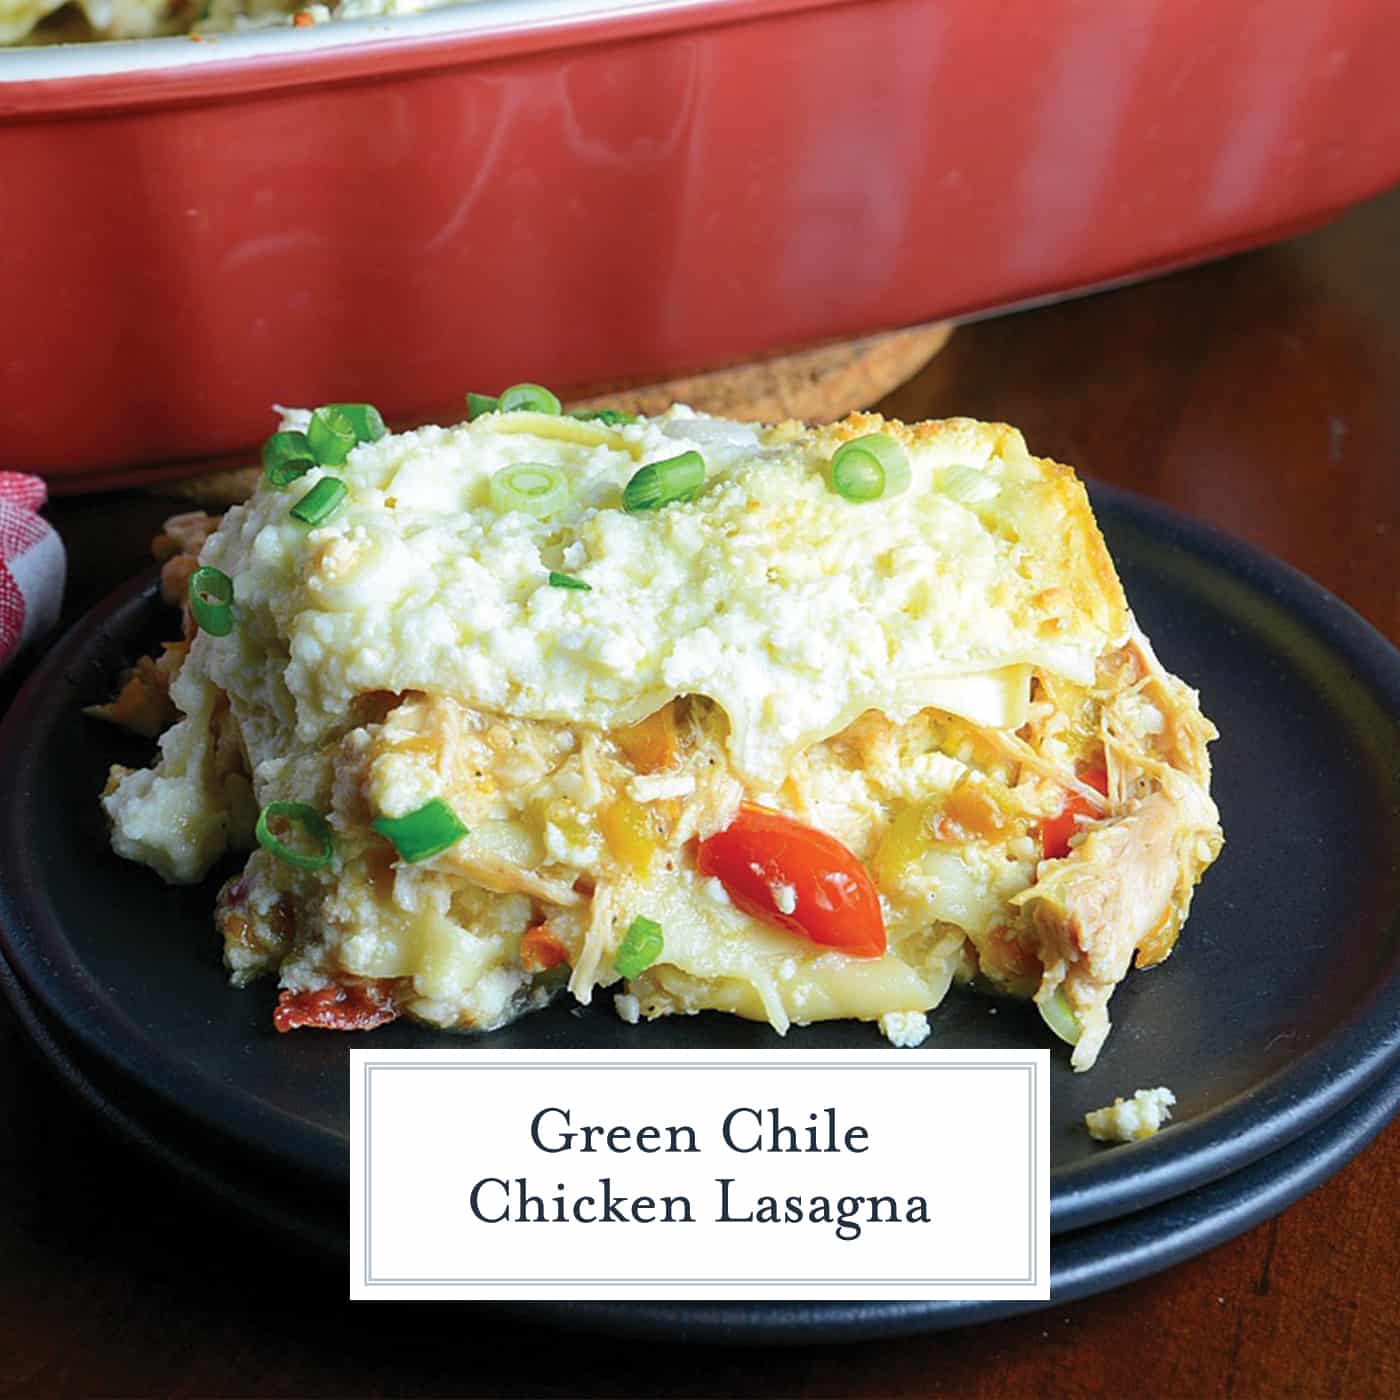 Green Chile Chicken Lasagna is a make-ahead and freezer friendly meal layering no-bake lasagna noodles with shredded chicken, spices, green chiles and lots of cheese! #chickenlasagna #mexicanlasagna www.savoryexperiments.com 